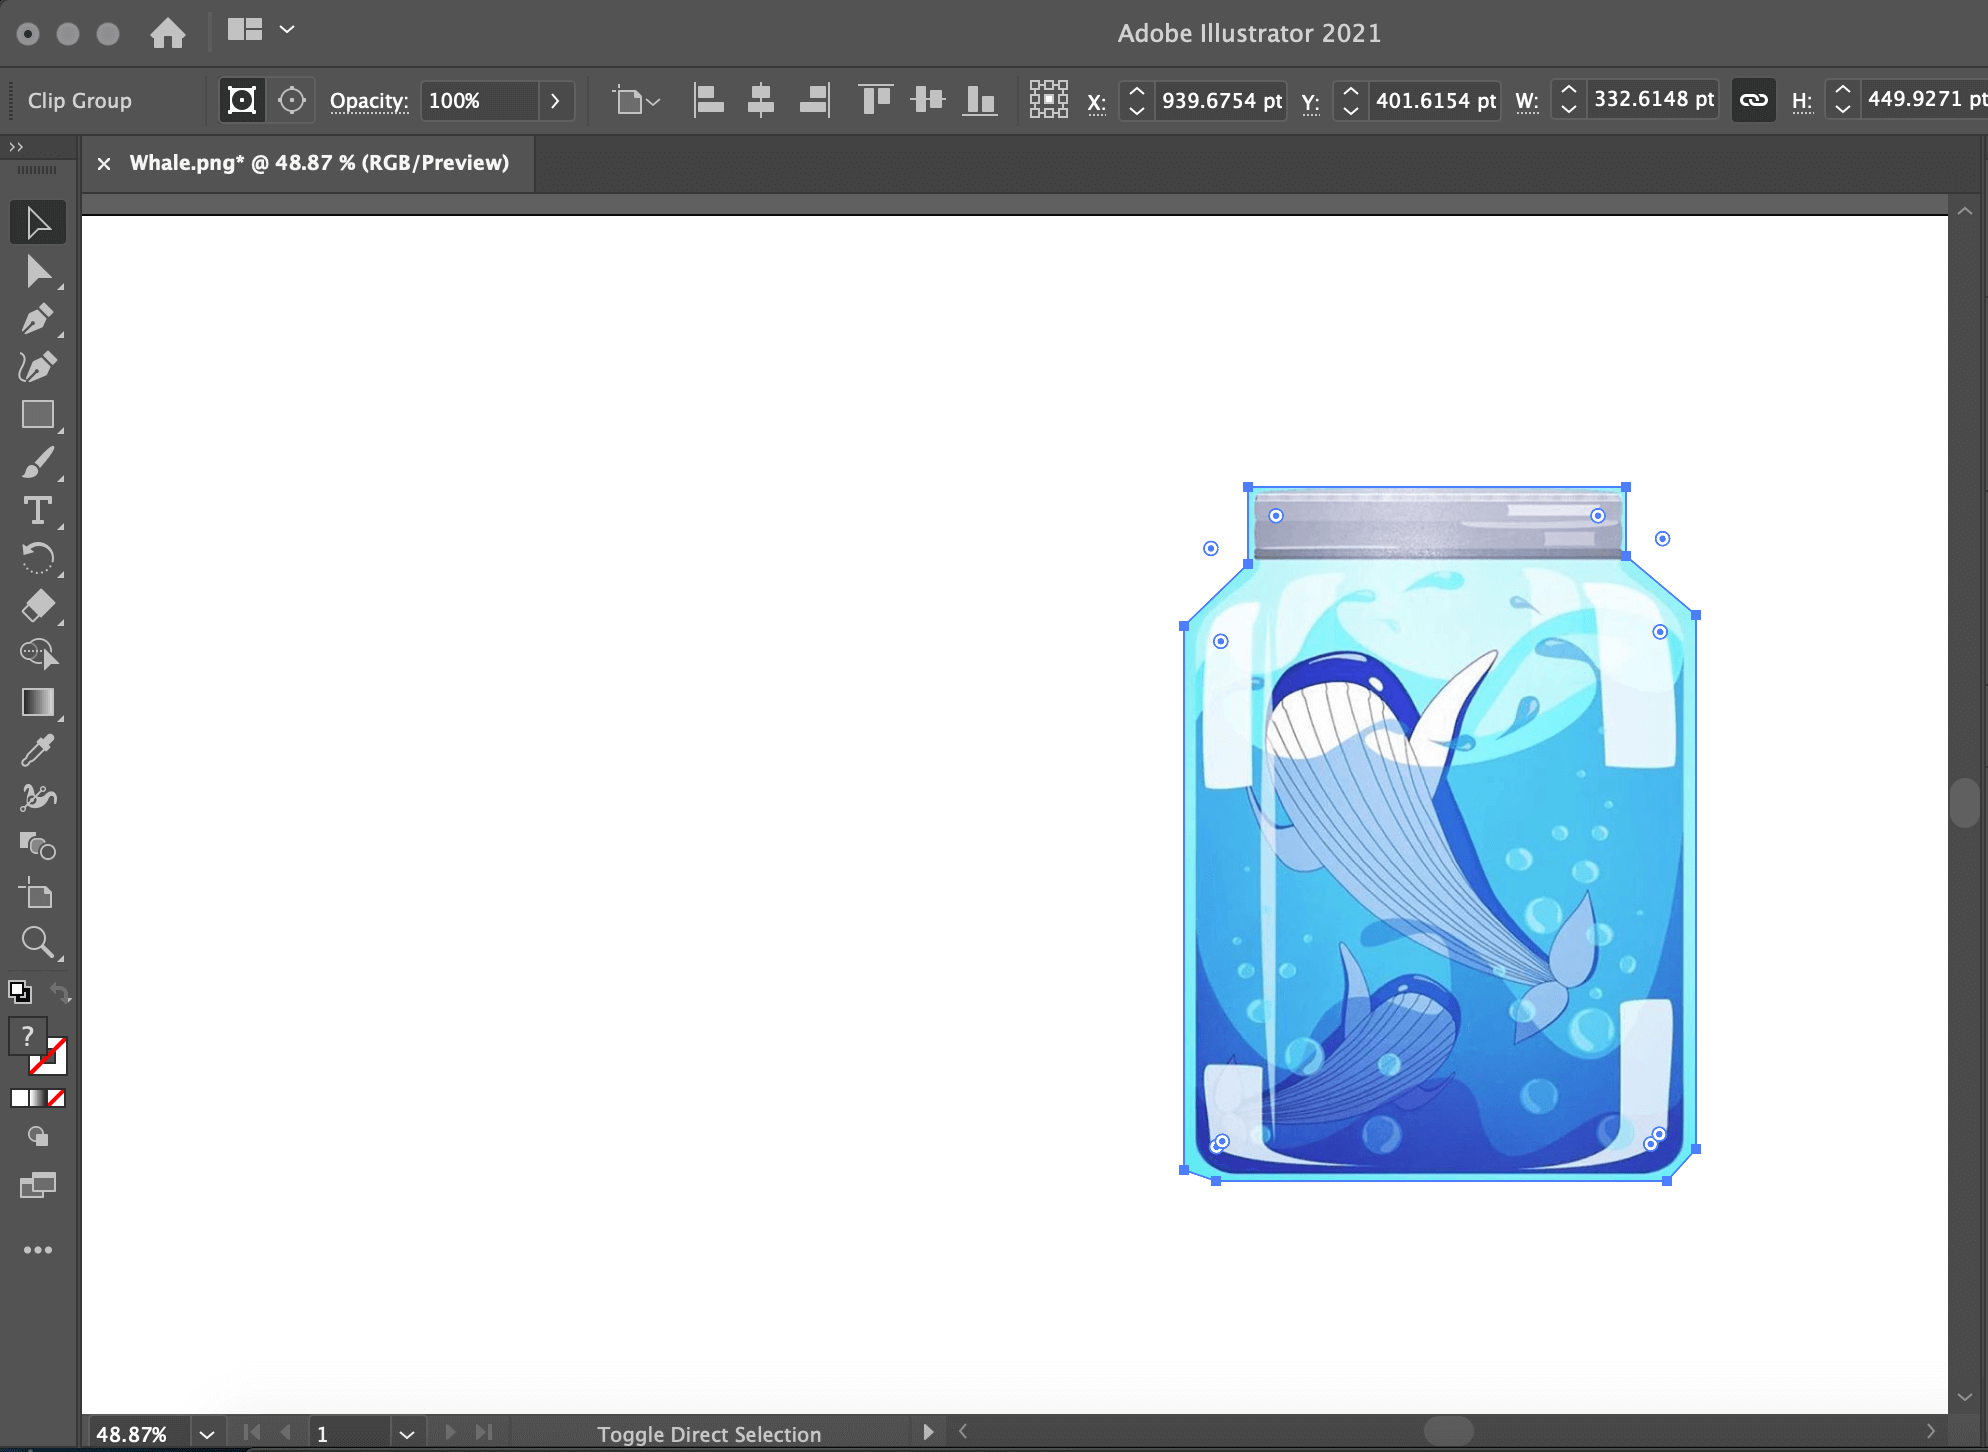 Clipped image in Illustrator